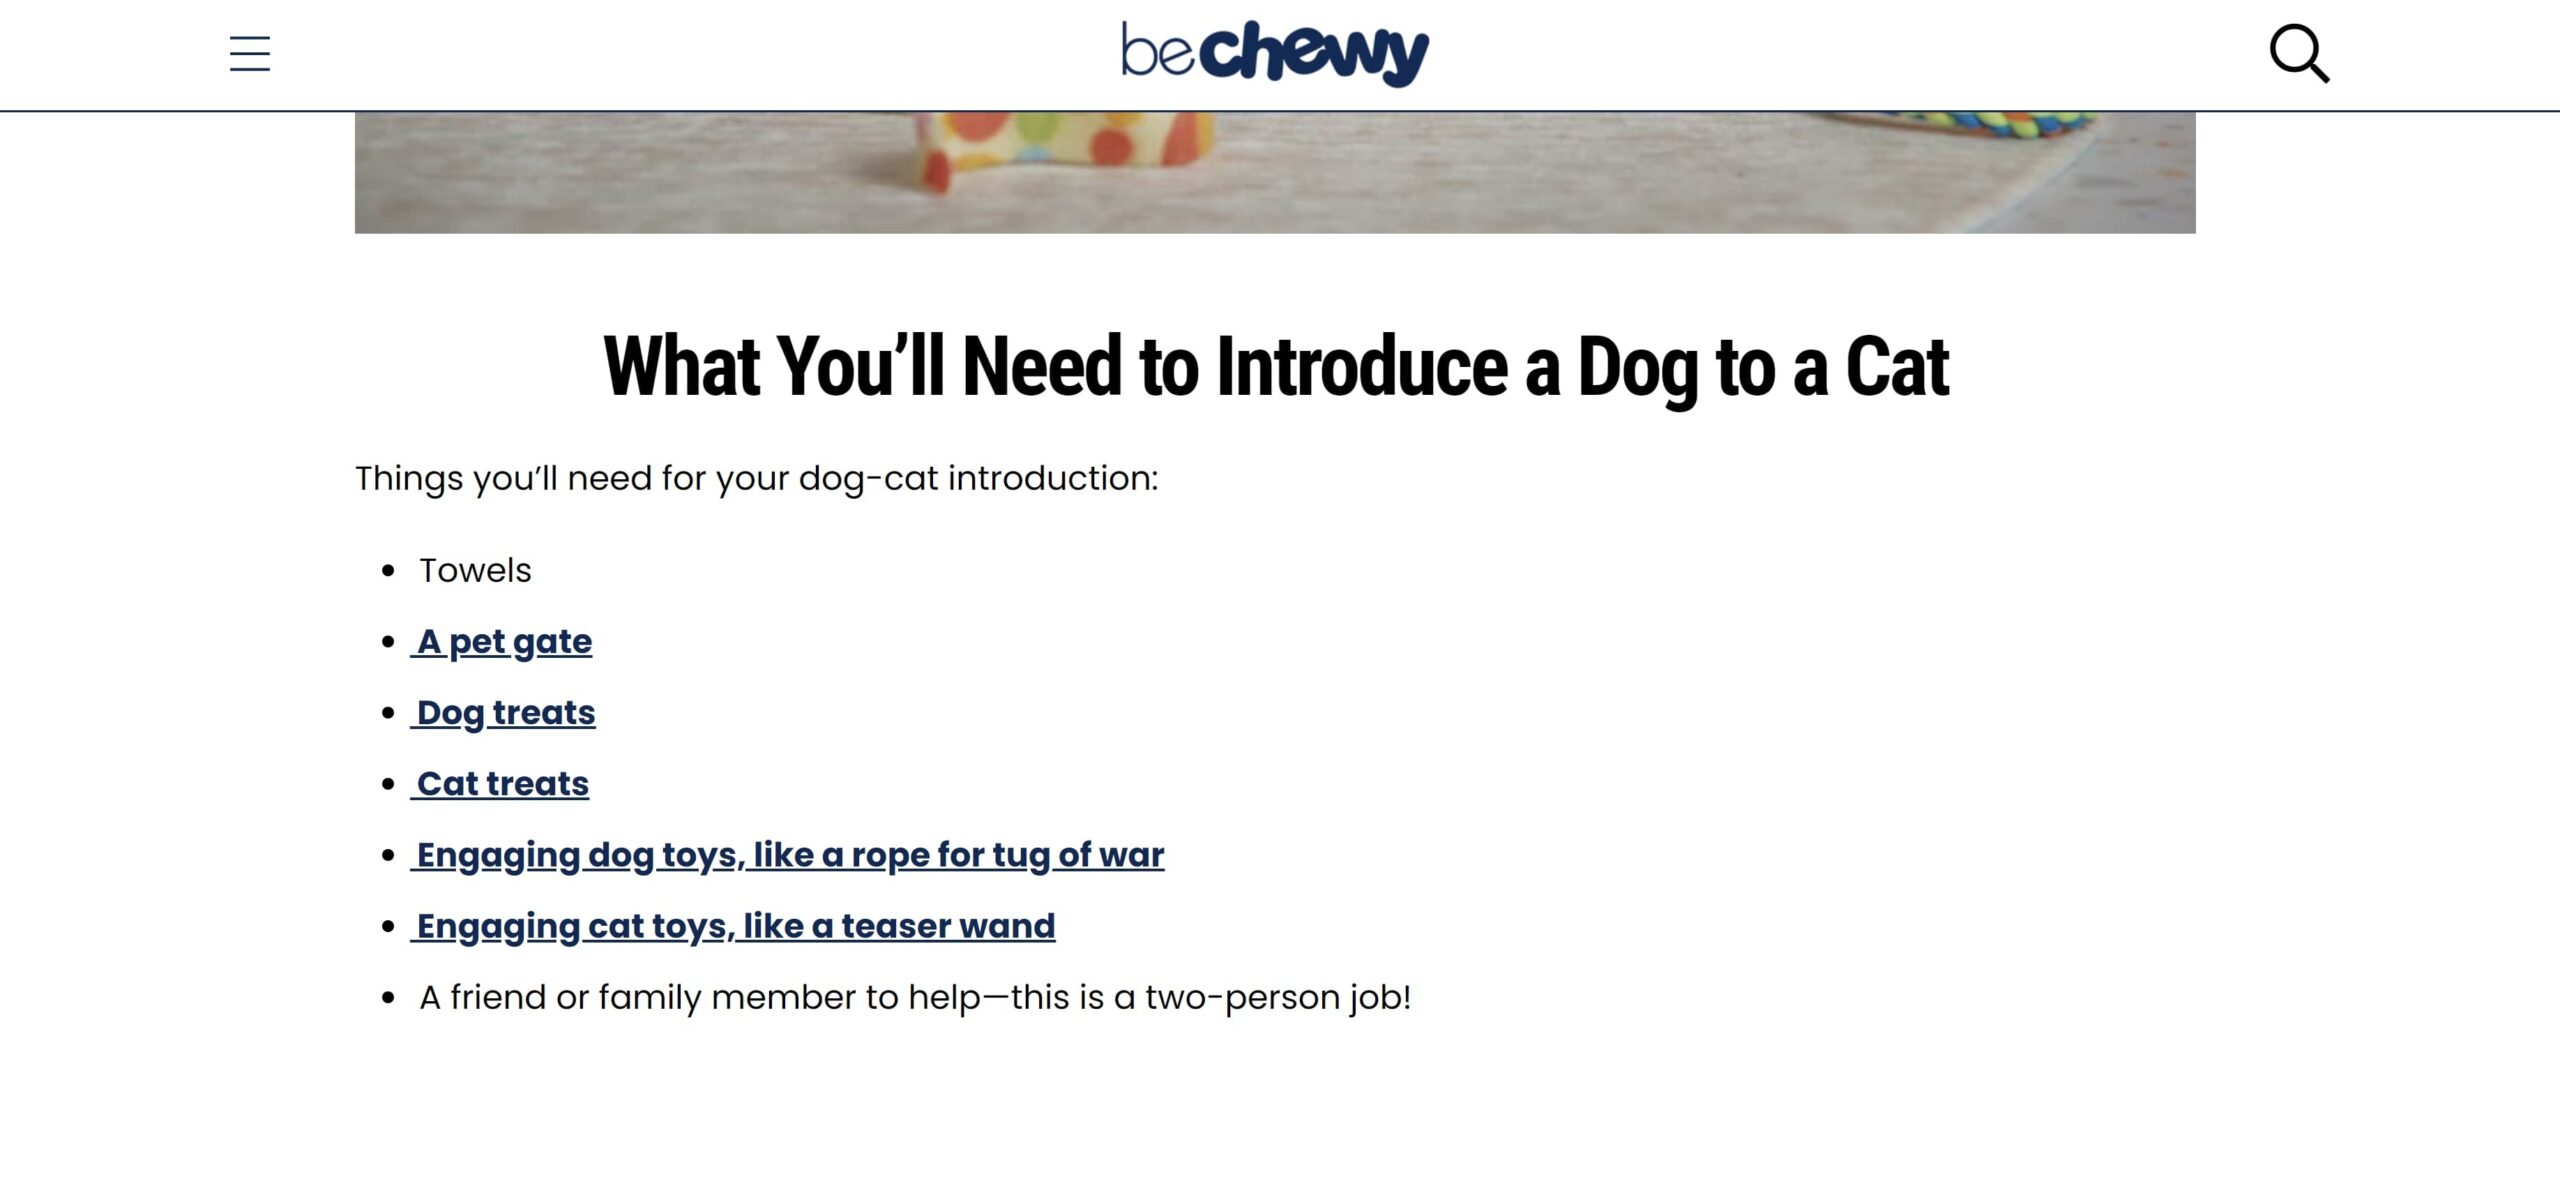 The BeChewy blog is a content marketing example